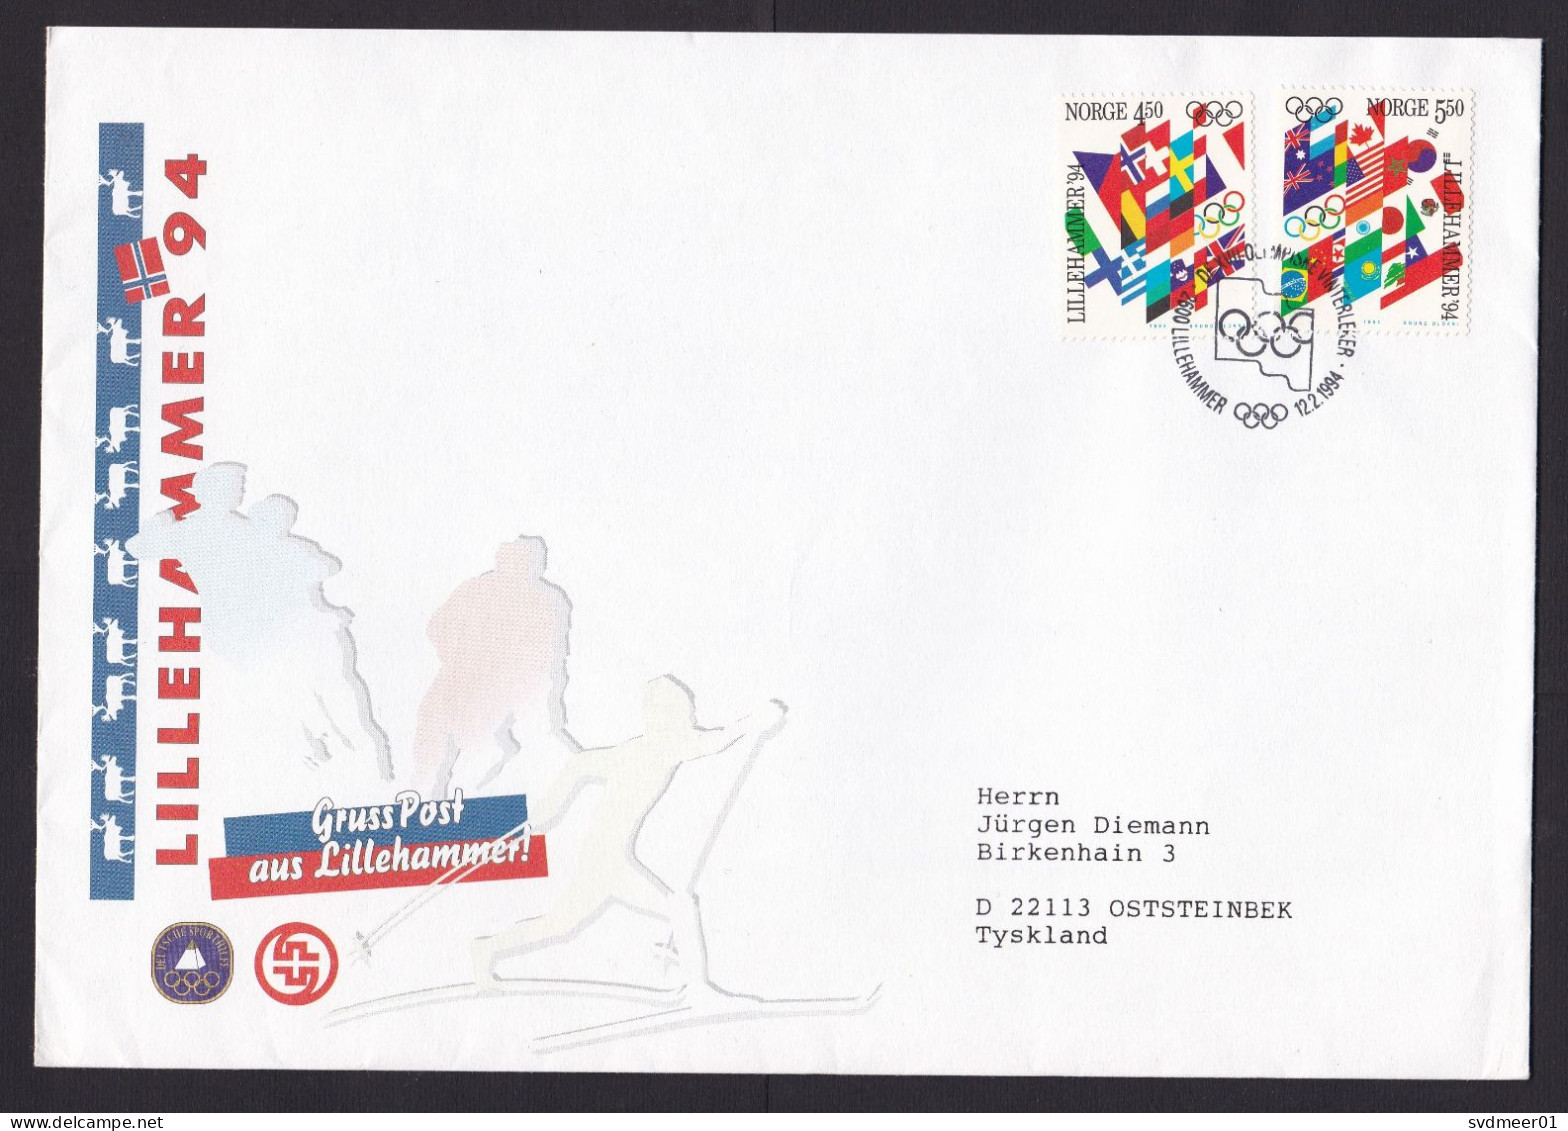 Norway: Cover To Gerrmany, 1994, 2 Stamps, Olympics Lillehammer, Picture Cards German Sporters Enclosed (traces Of Use) - Cartas & Documentos